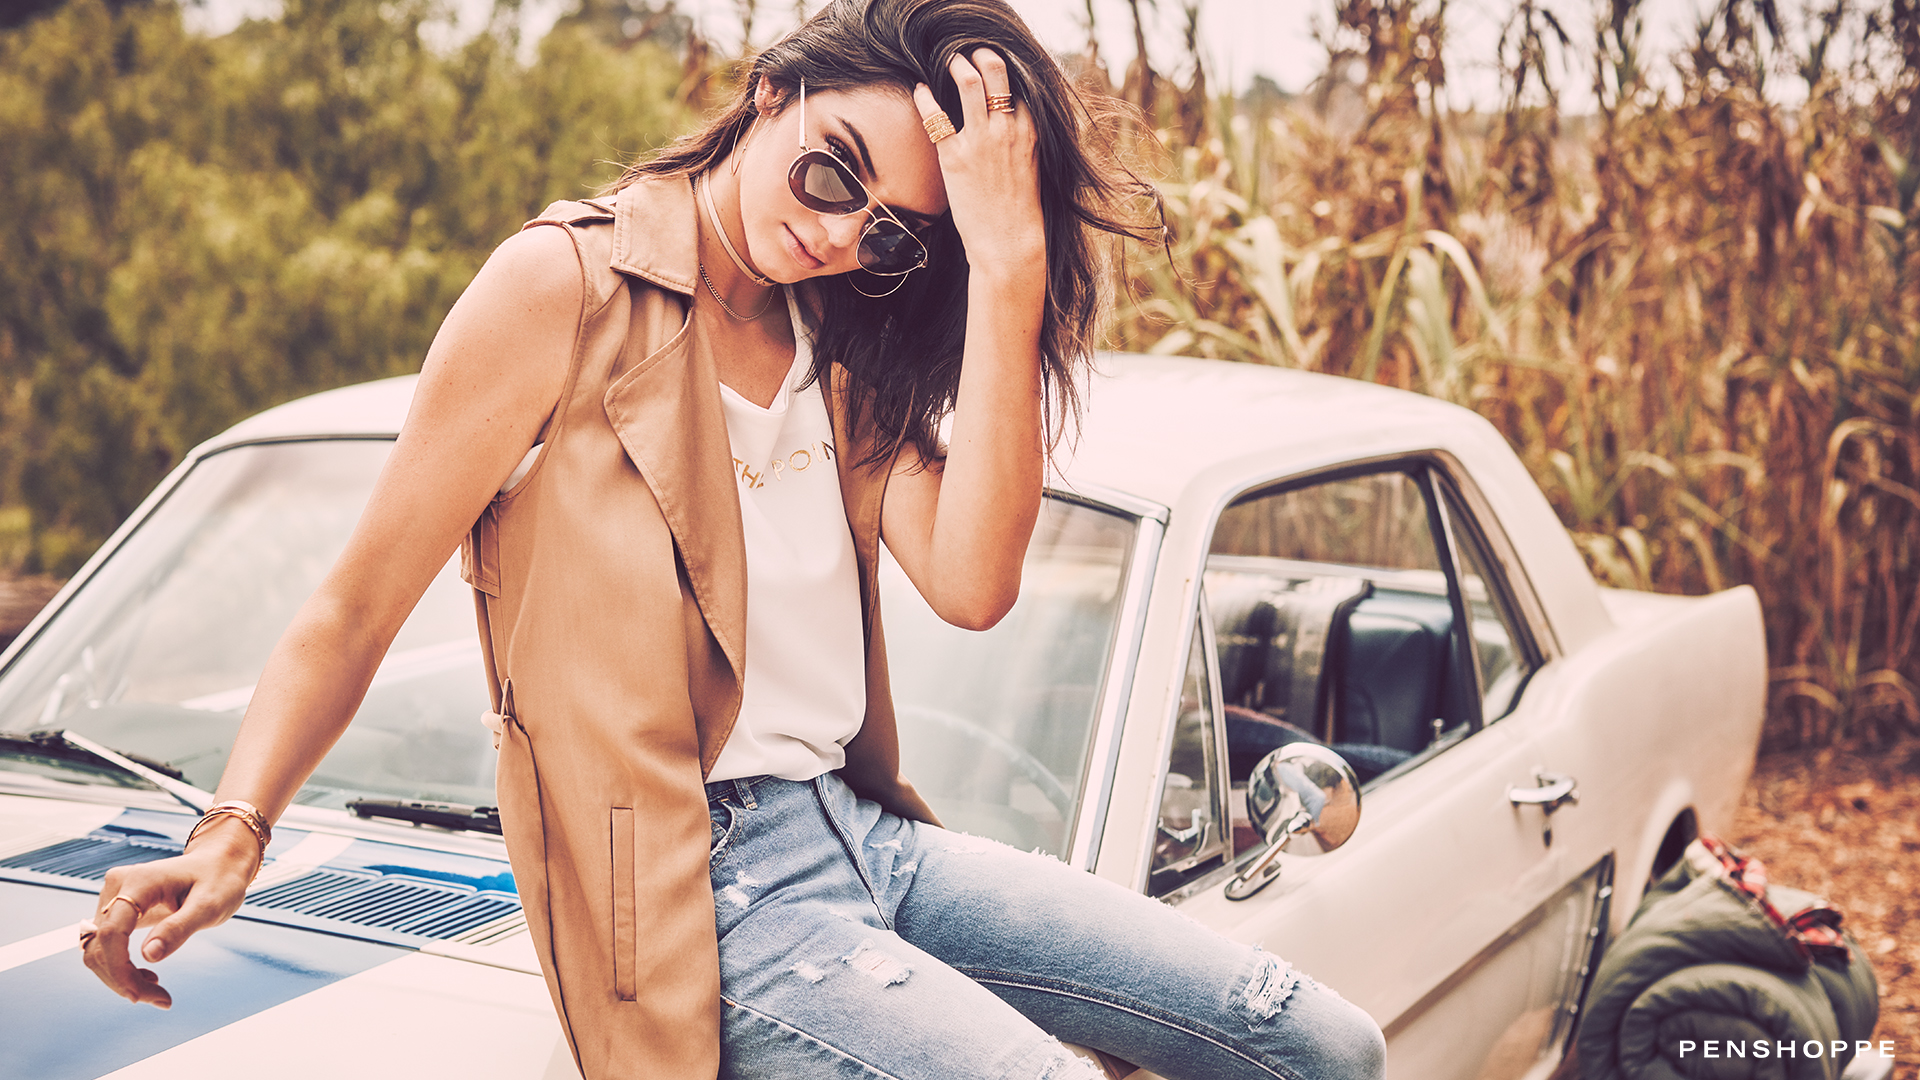 People 1920x1080 Kendall Jenner model women women with cars glasses women with glasses Penshoppe touching hair Ford Ford Mustang muscle cars American cars car American women